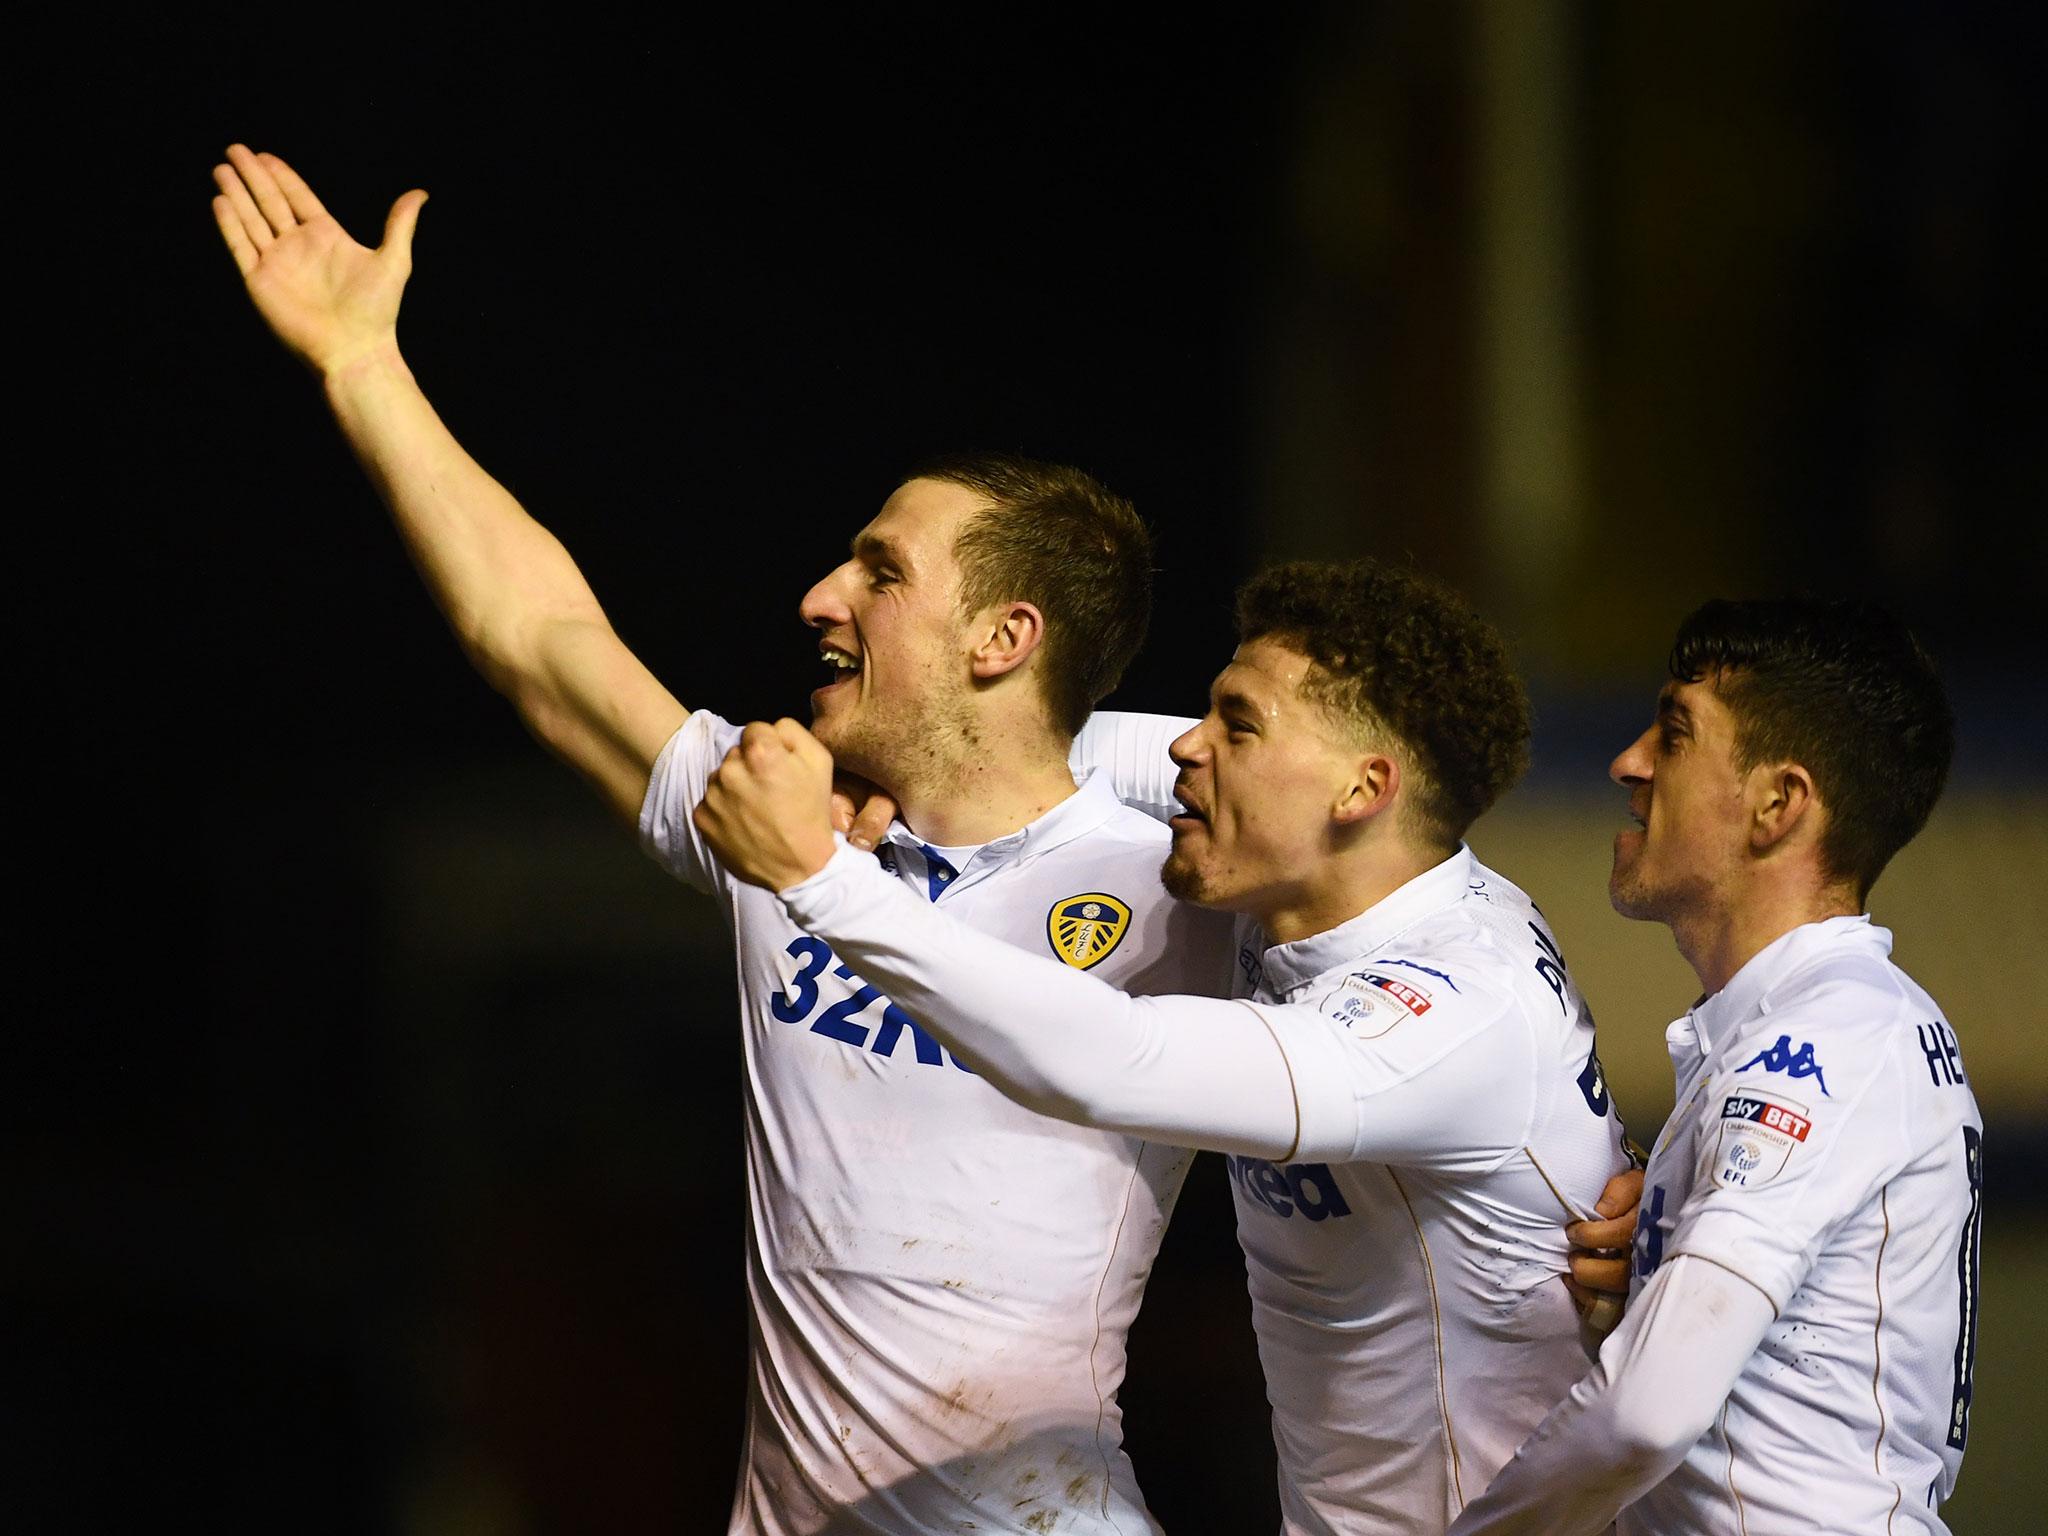 Chris Wood scored 41 league goals during his time at Leeds